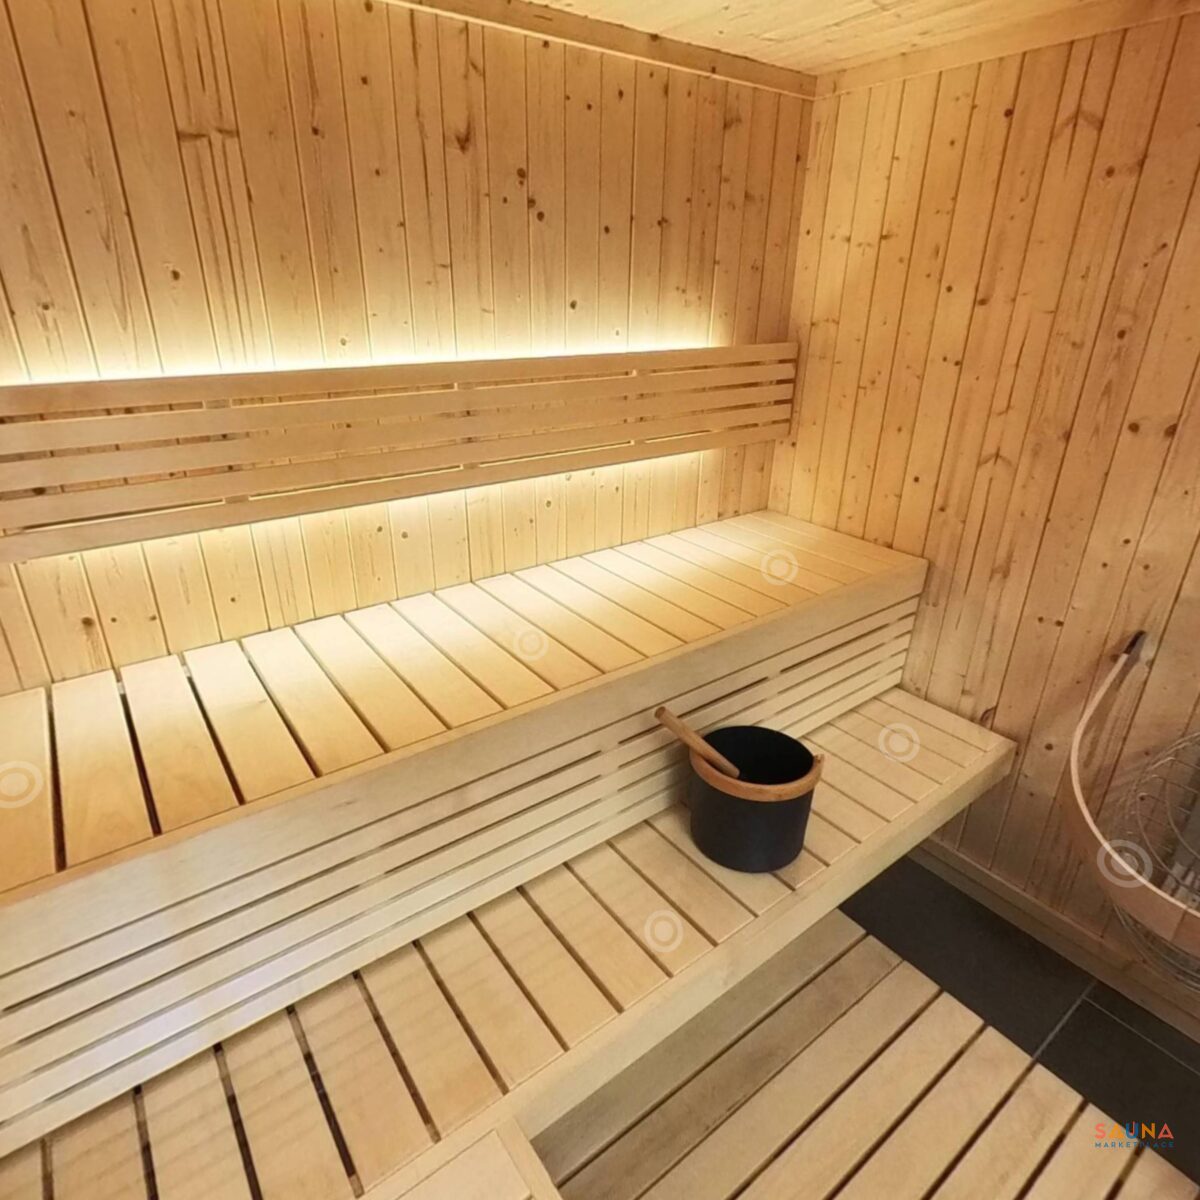 Interior Left Low Bench X7 From Virtual Tour On Sauna Marketplace